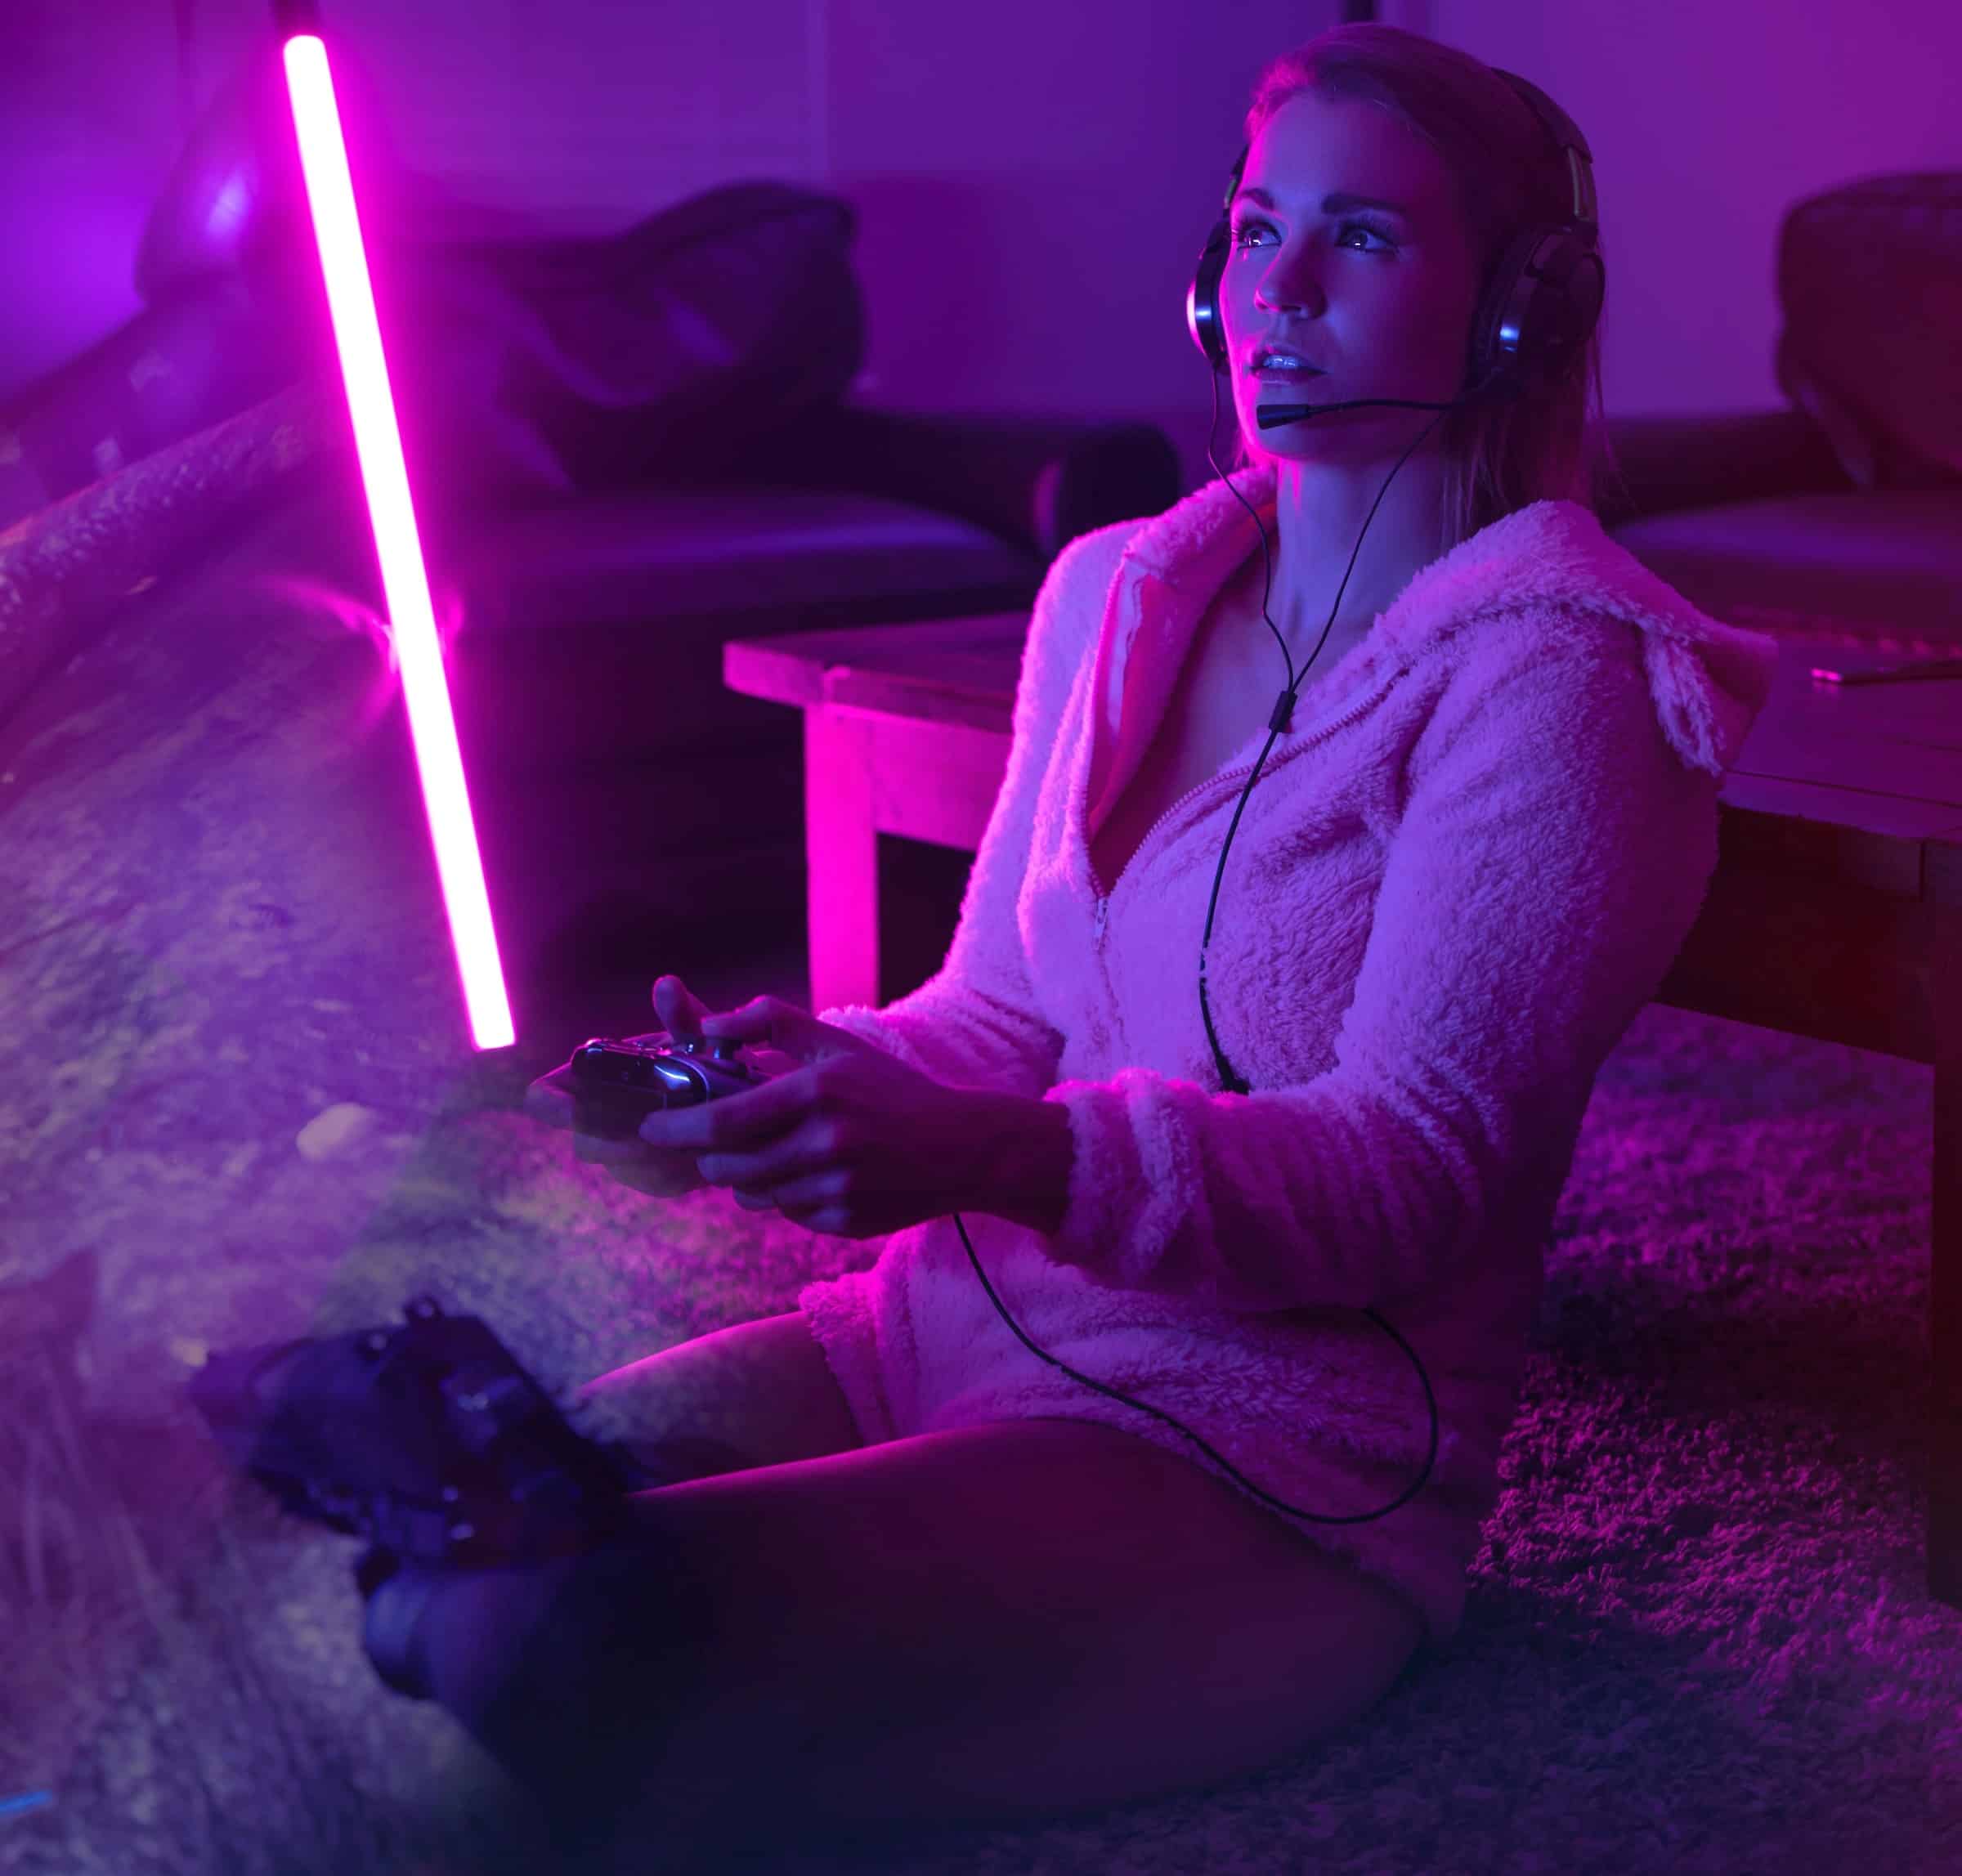 Girl playing video games